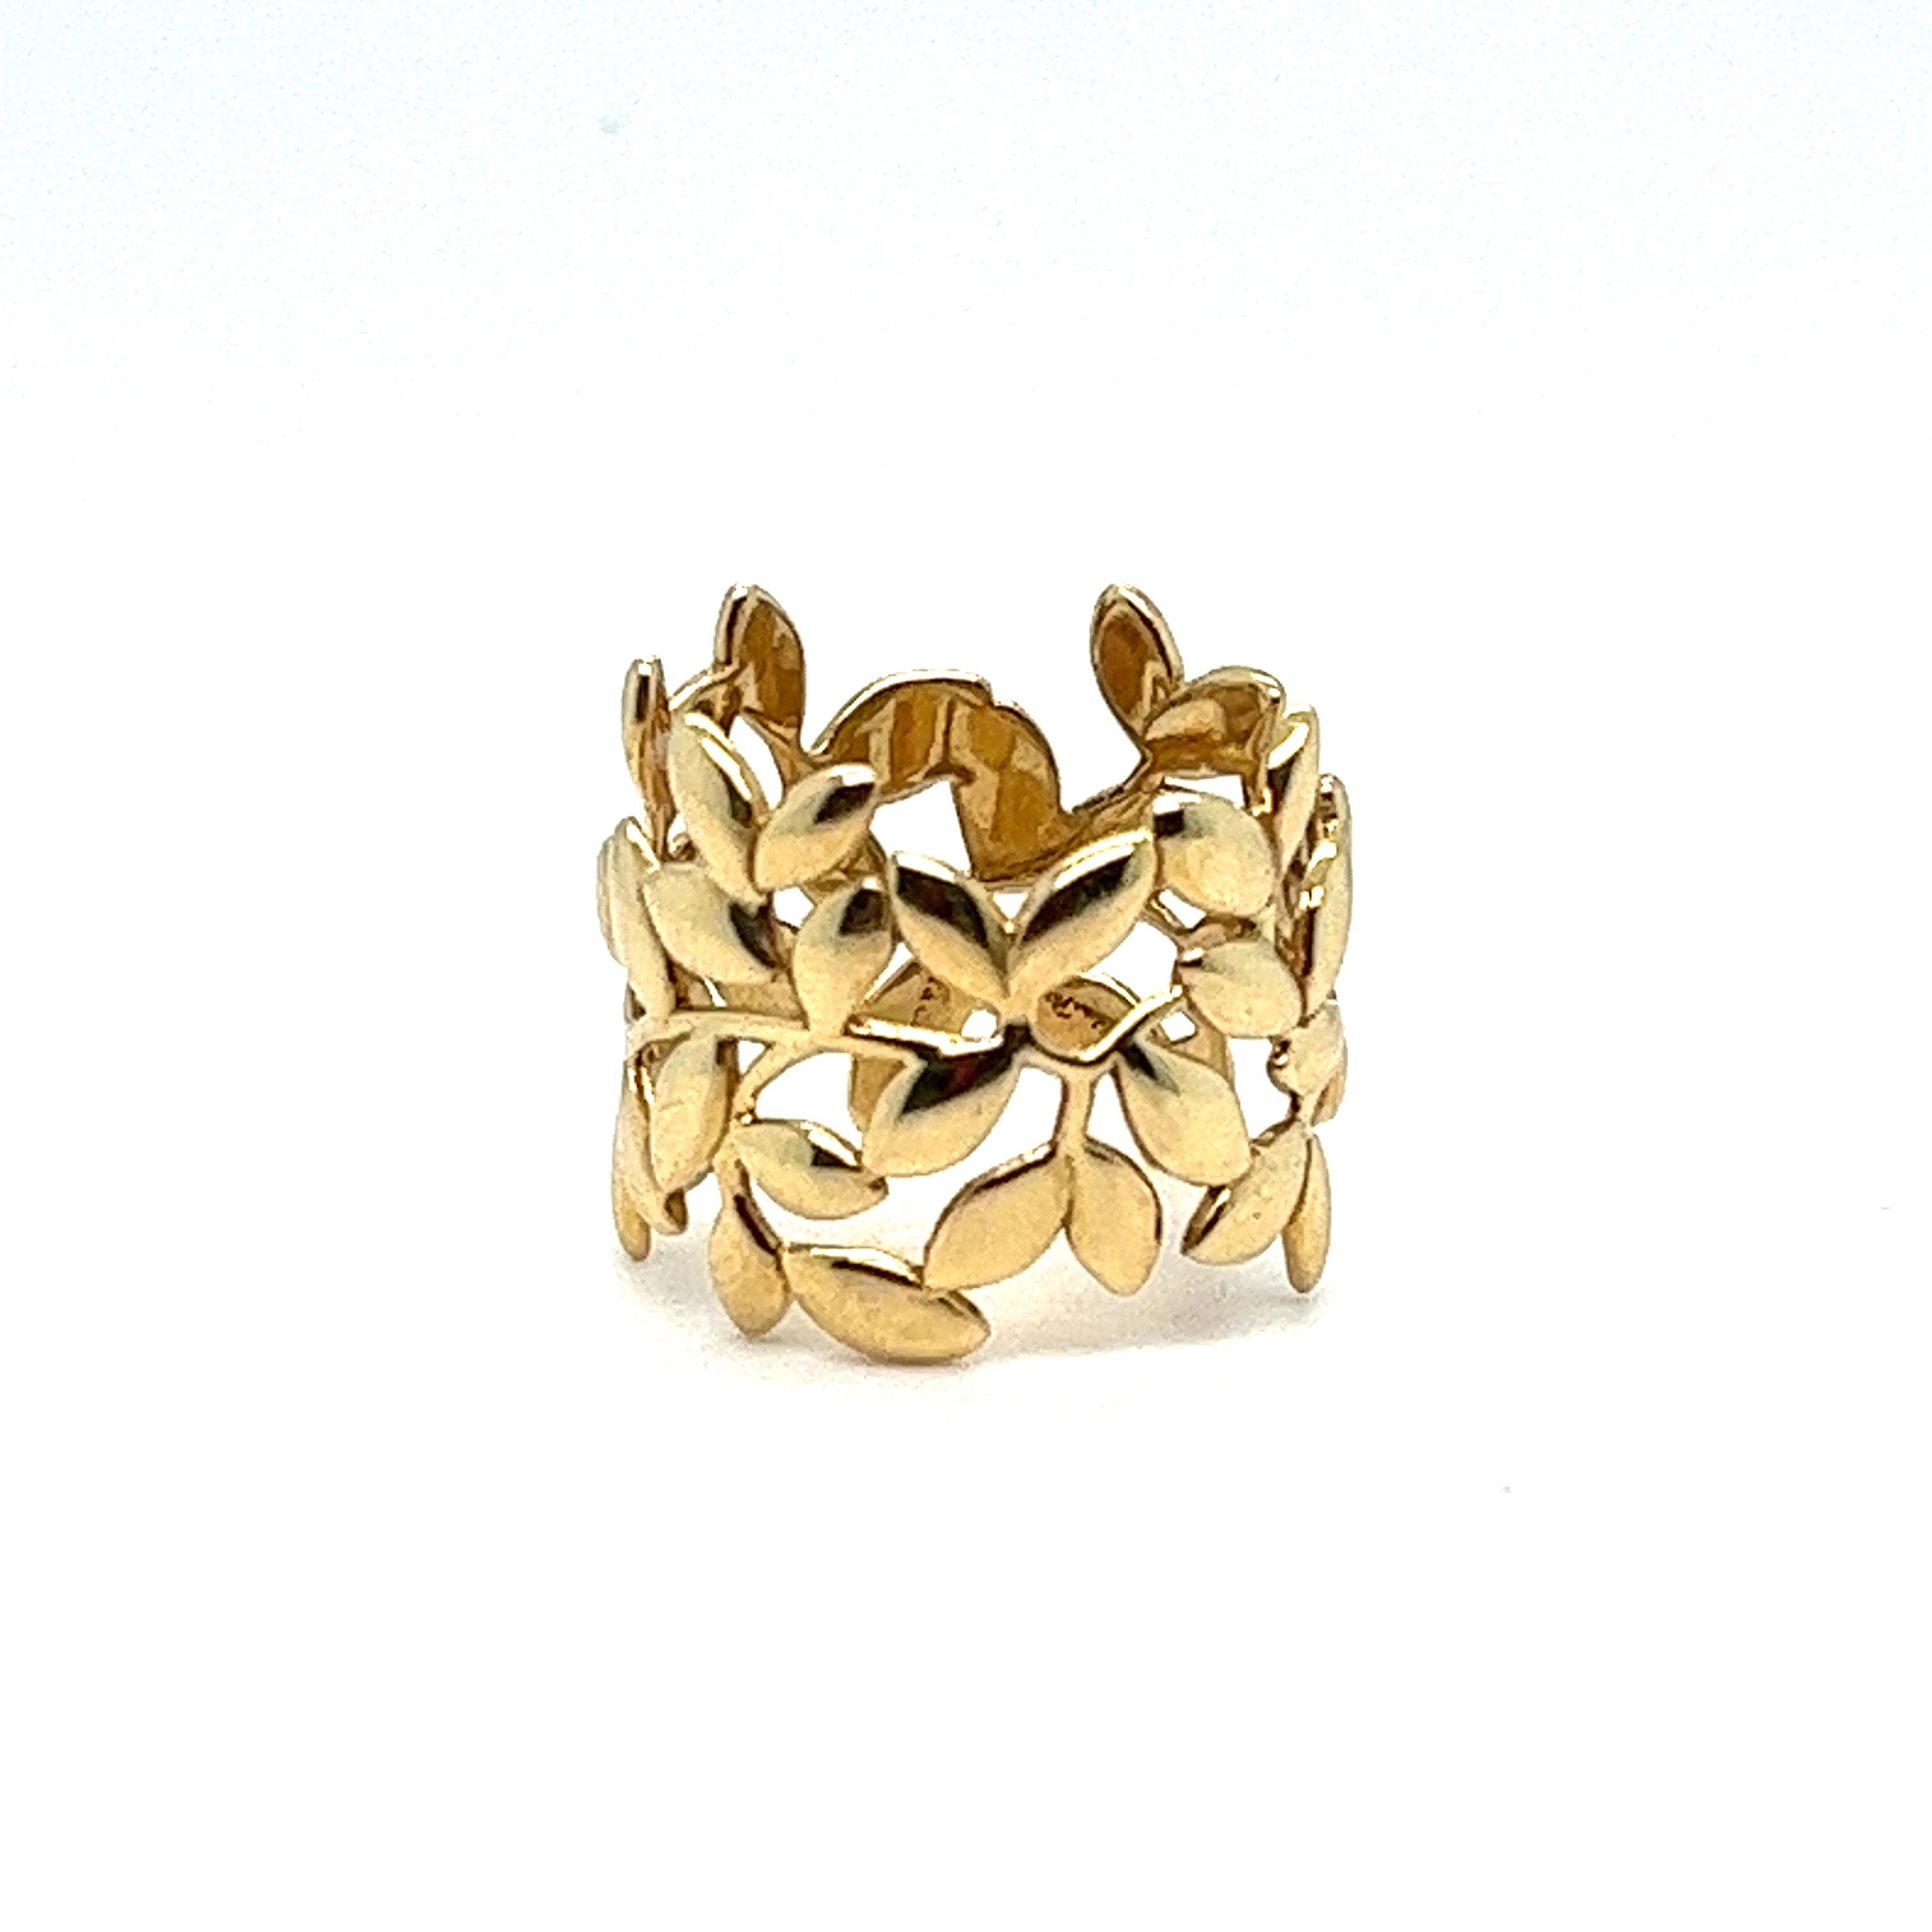 Offered here is an authentic Paloma Picasso®
Olive Leaf Band Ring
in Yellow 18 karat Gold.
With beautifully sculpted leaves in 18k gold, Paloma honors the olive branch, a symbol of peace and abundance. Band ring in 18k gold. Original designs